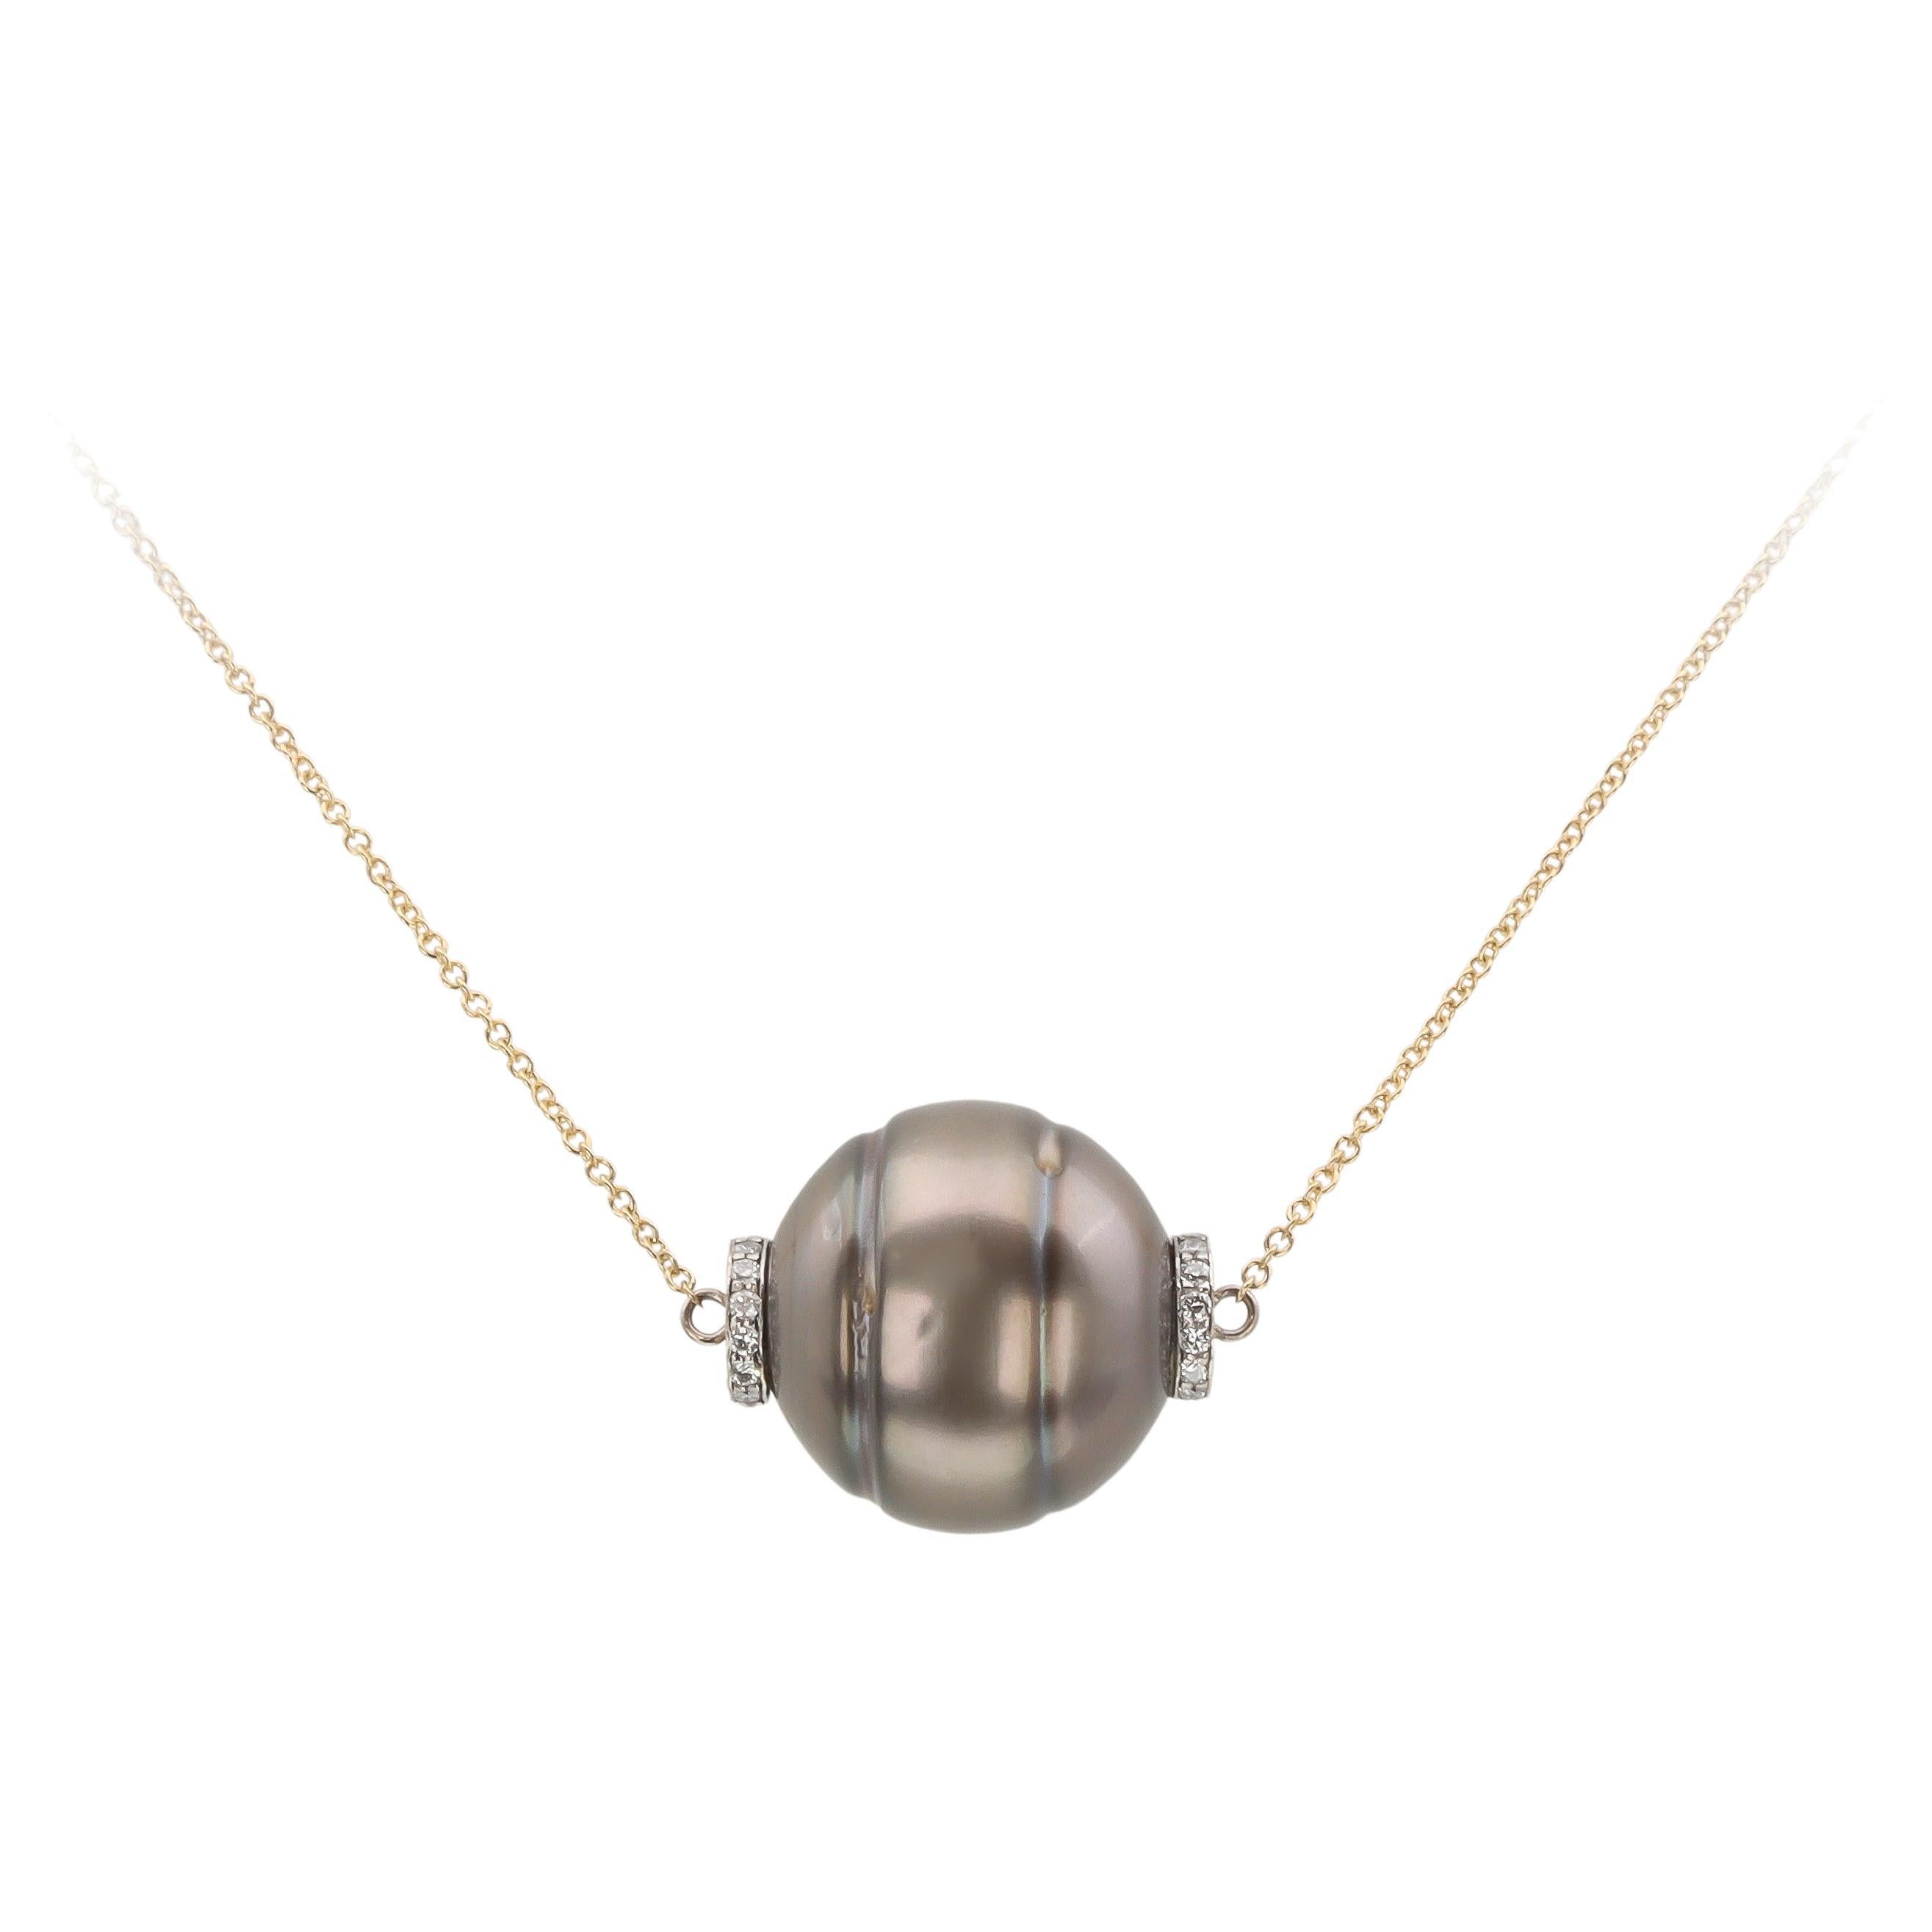 Aventina-Spencer, 'Luna' Circled Tahitian Pearl, Diamond and 18k Gold Necklace